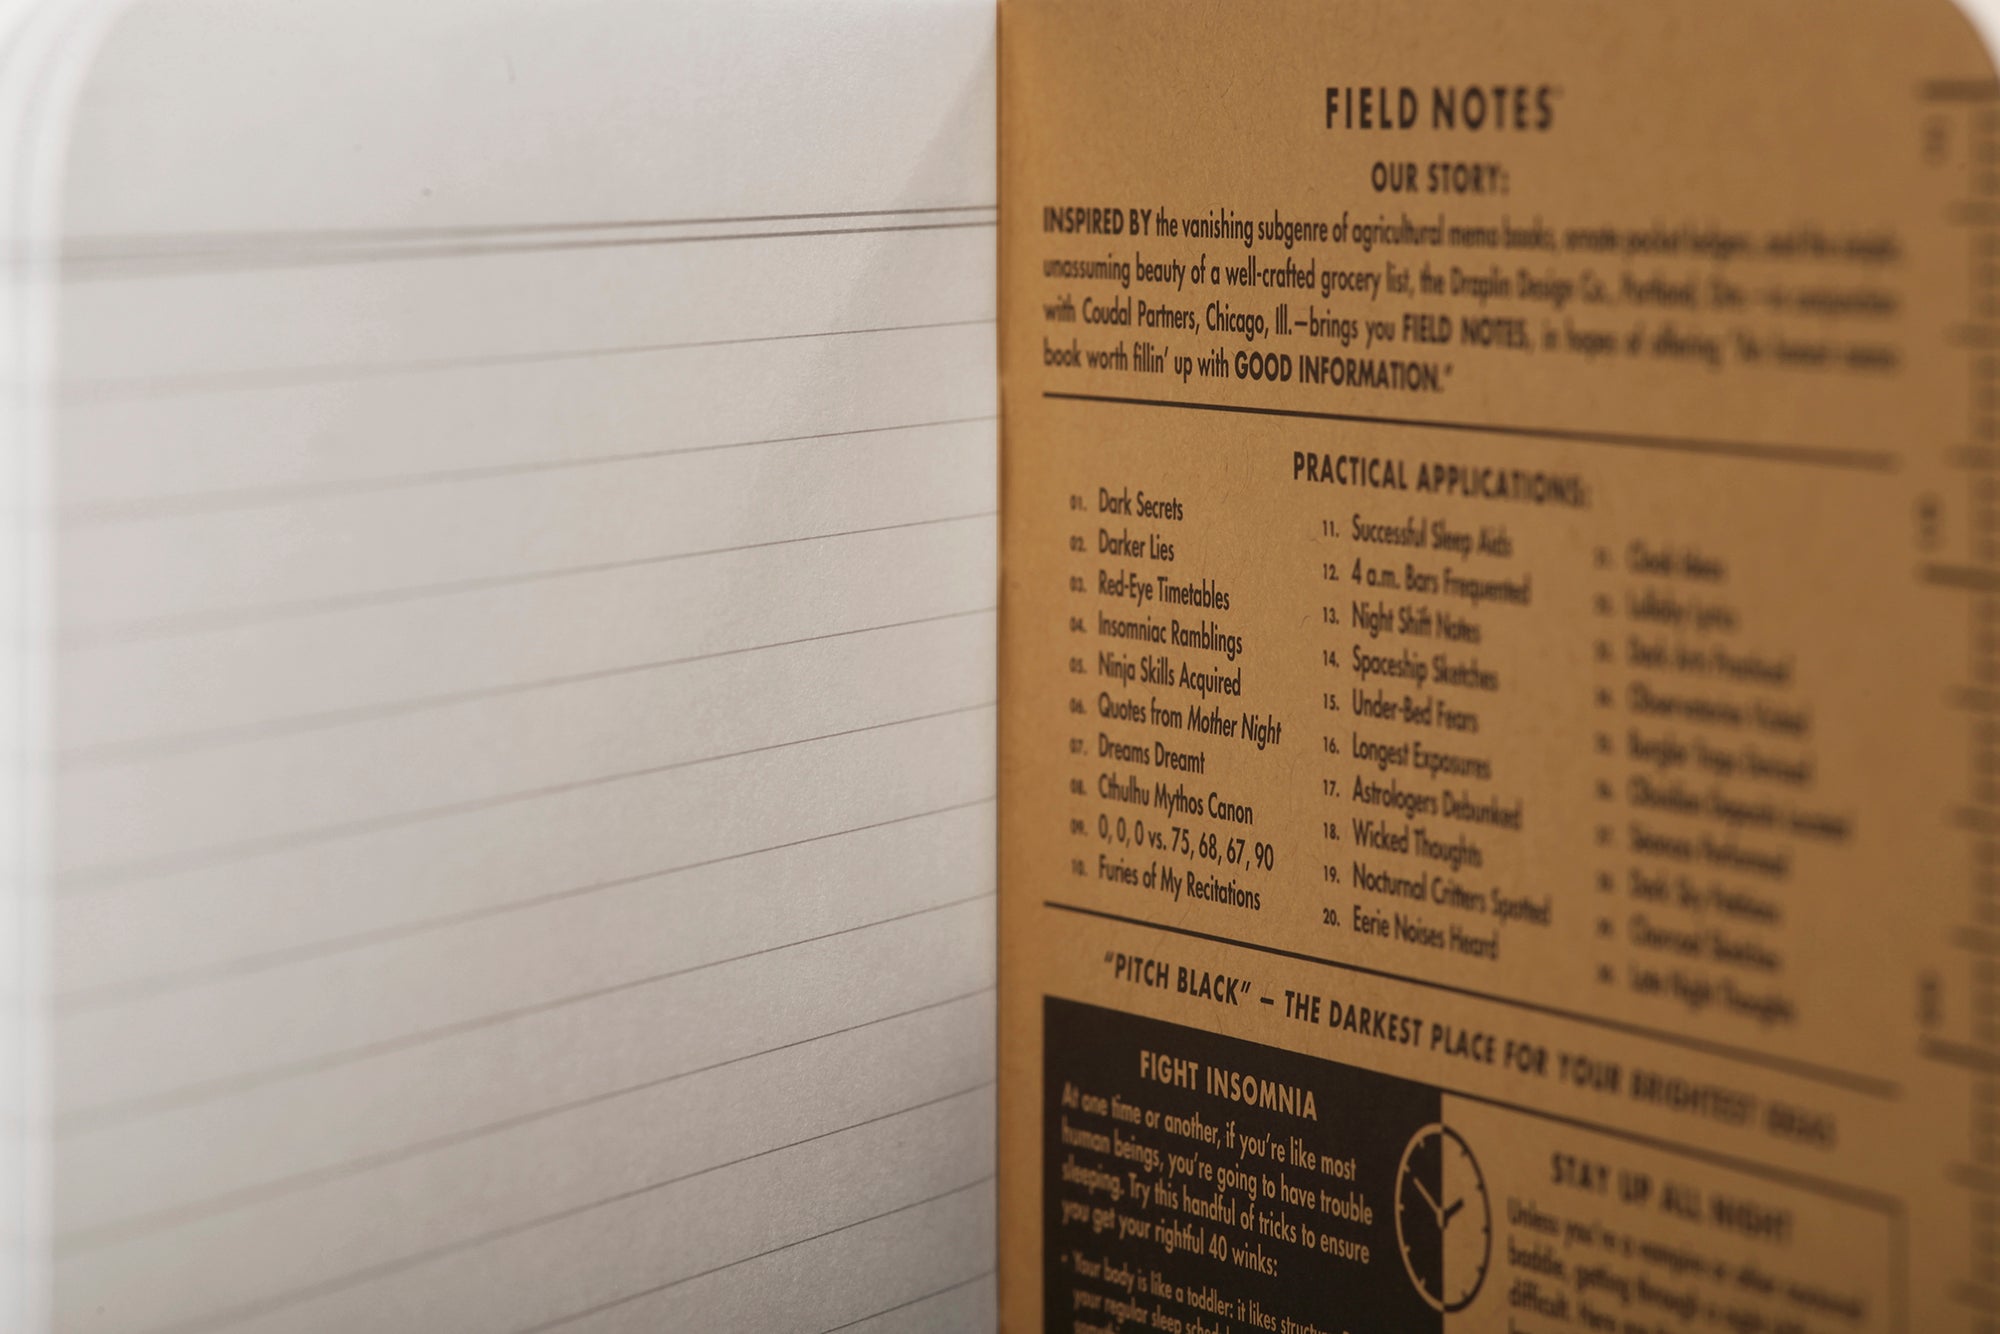 Field Notes: Pitch Black Note Book